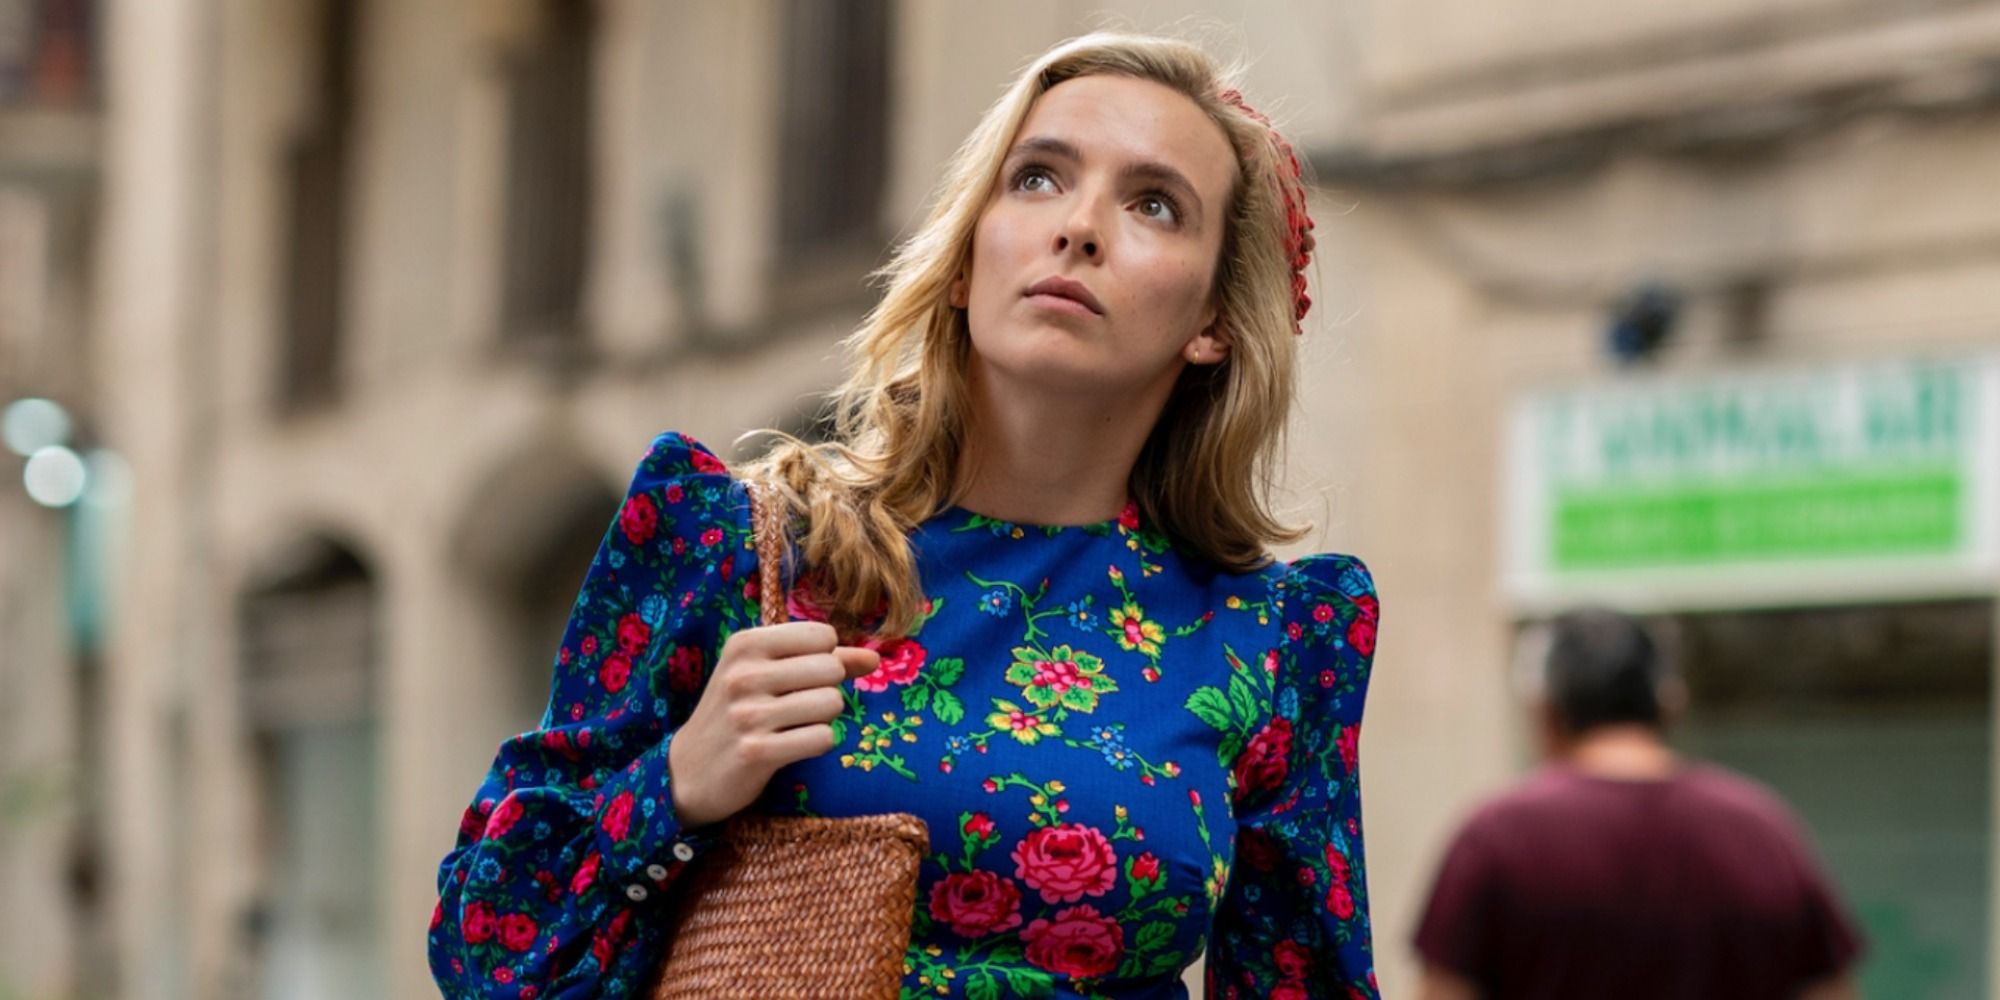 Jodie Comer as Villanelle in Killing Eve walking around holding a purse in a floral dress, looking up.